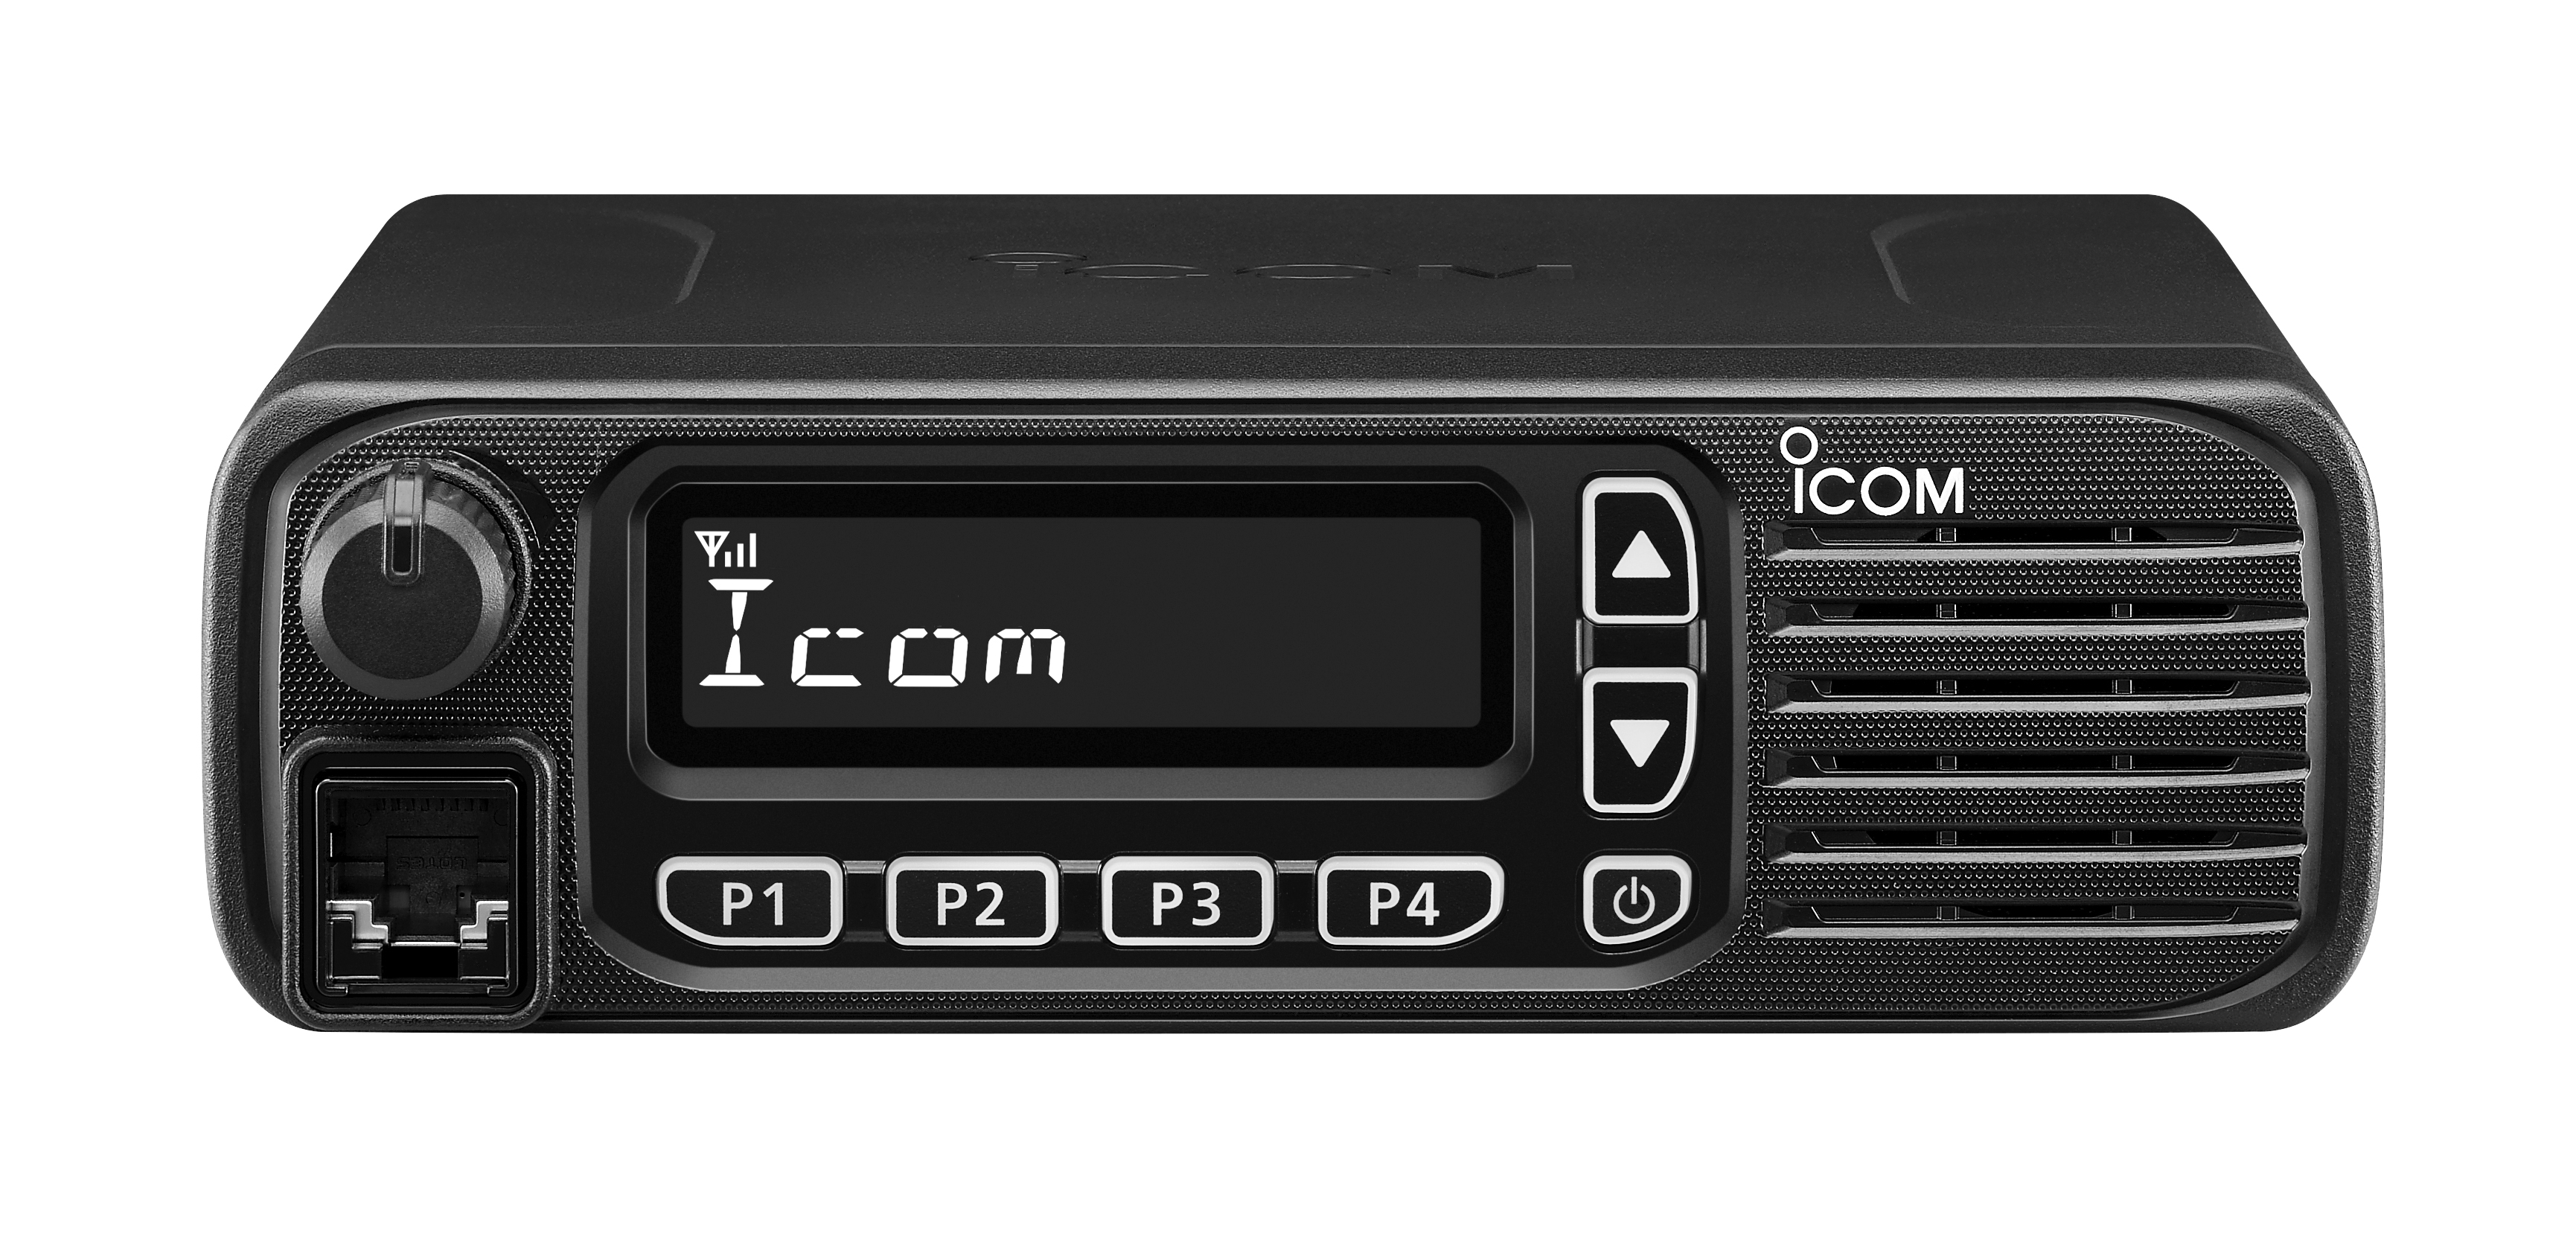 IC-F5130D/F6103D VHF/UHF Digital Mobile Radio Series (Angled From Top Image)